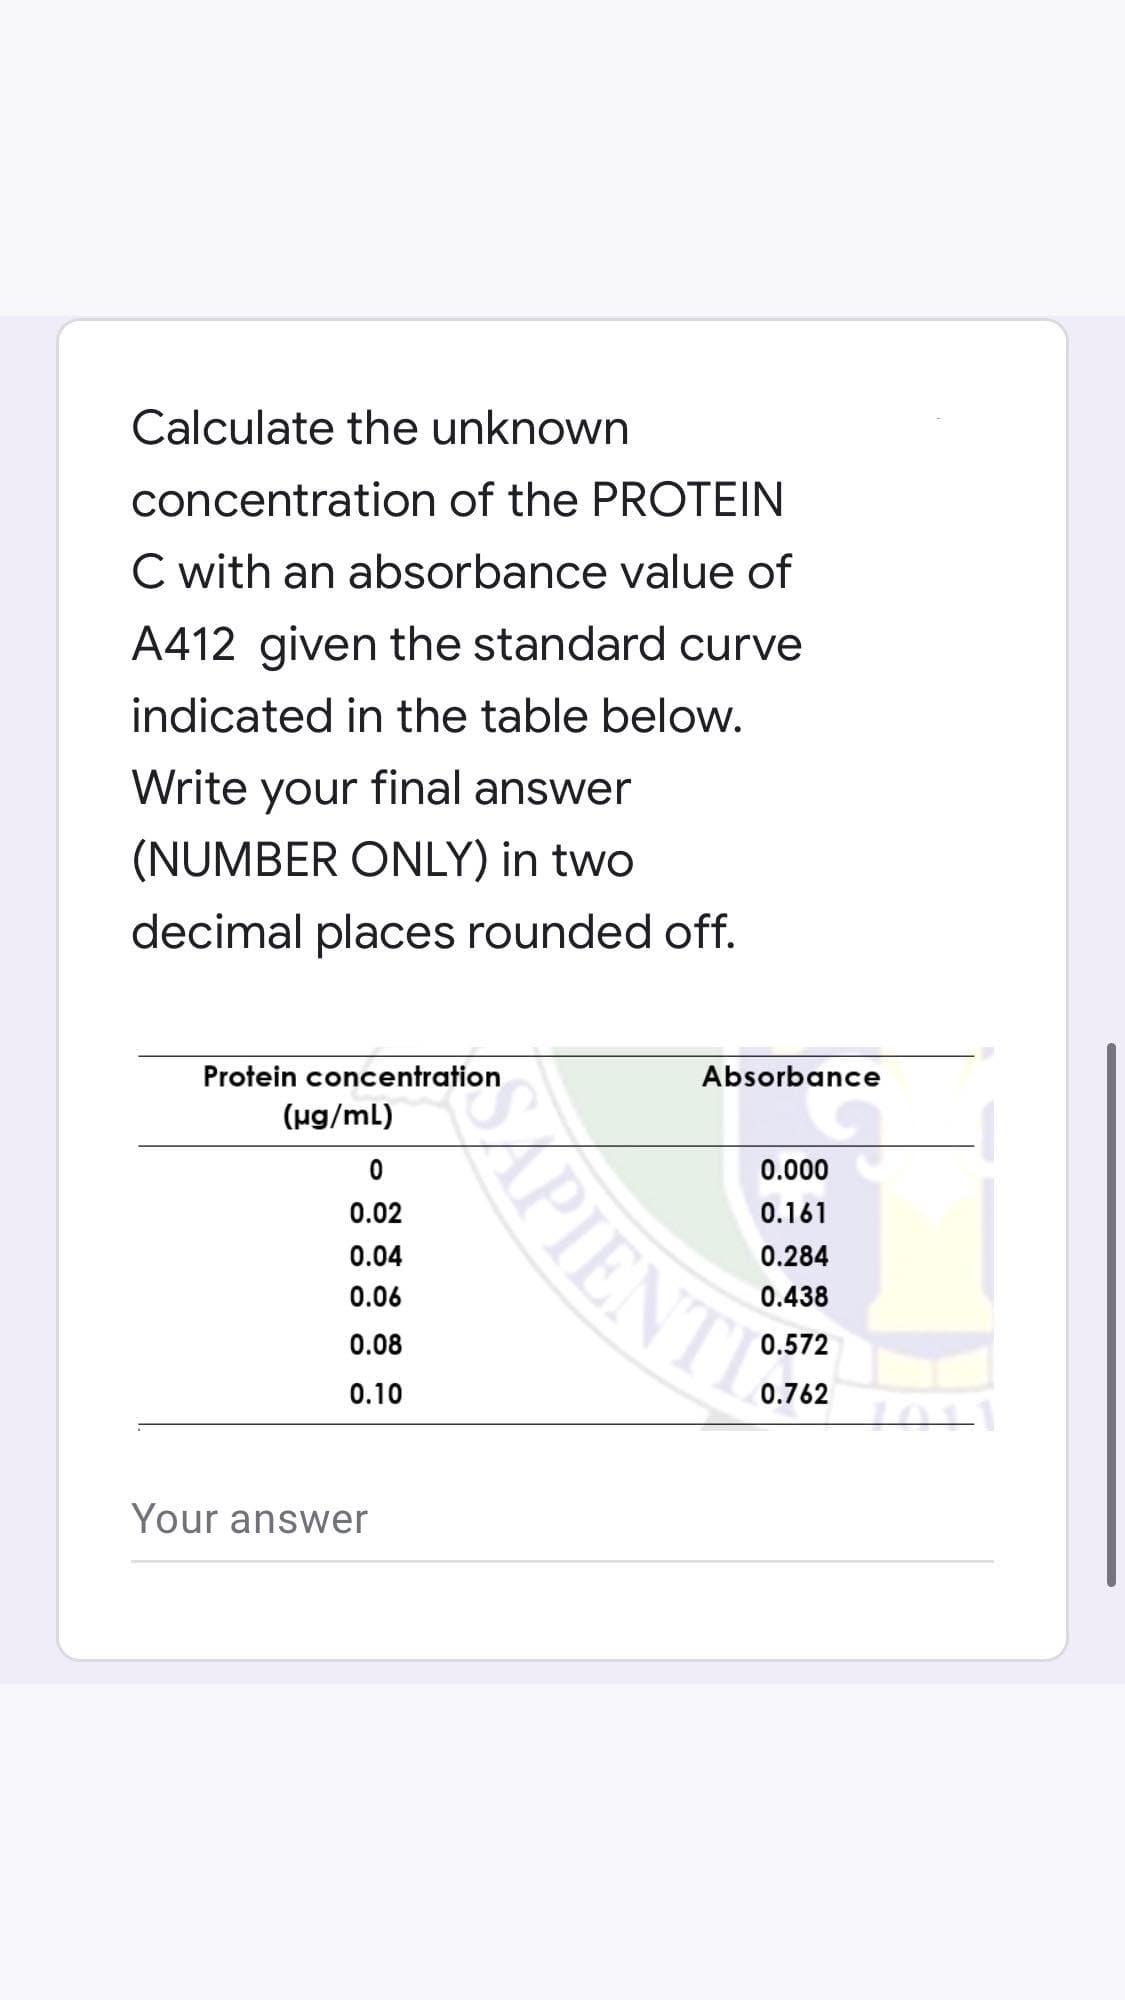 Calculate the unknown
concentration of the PROTEIN
C with an absorbance value of
A412 given the standard curve
indicated in the table below.
Write your final answer
(NUMBER ONLY) in two
decimal places rounded off.
Protein concentration
(µg/mL)
0
0.02
0.04
0.06
0.08
0.10
Your answer
APIENT
Absorbance
0.000
0.161
0.284
0.438
0.572
0.762